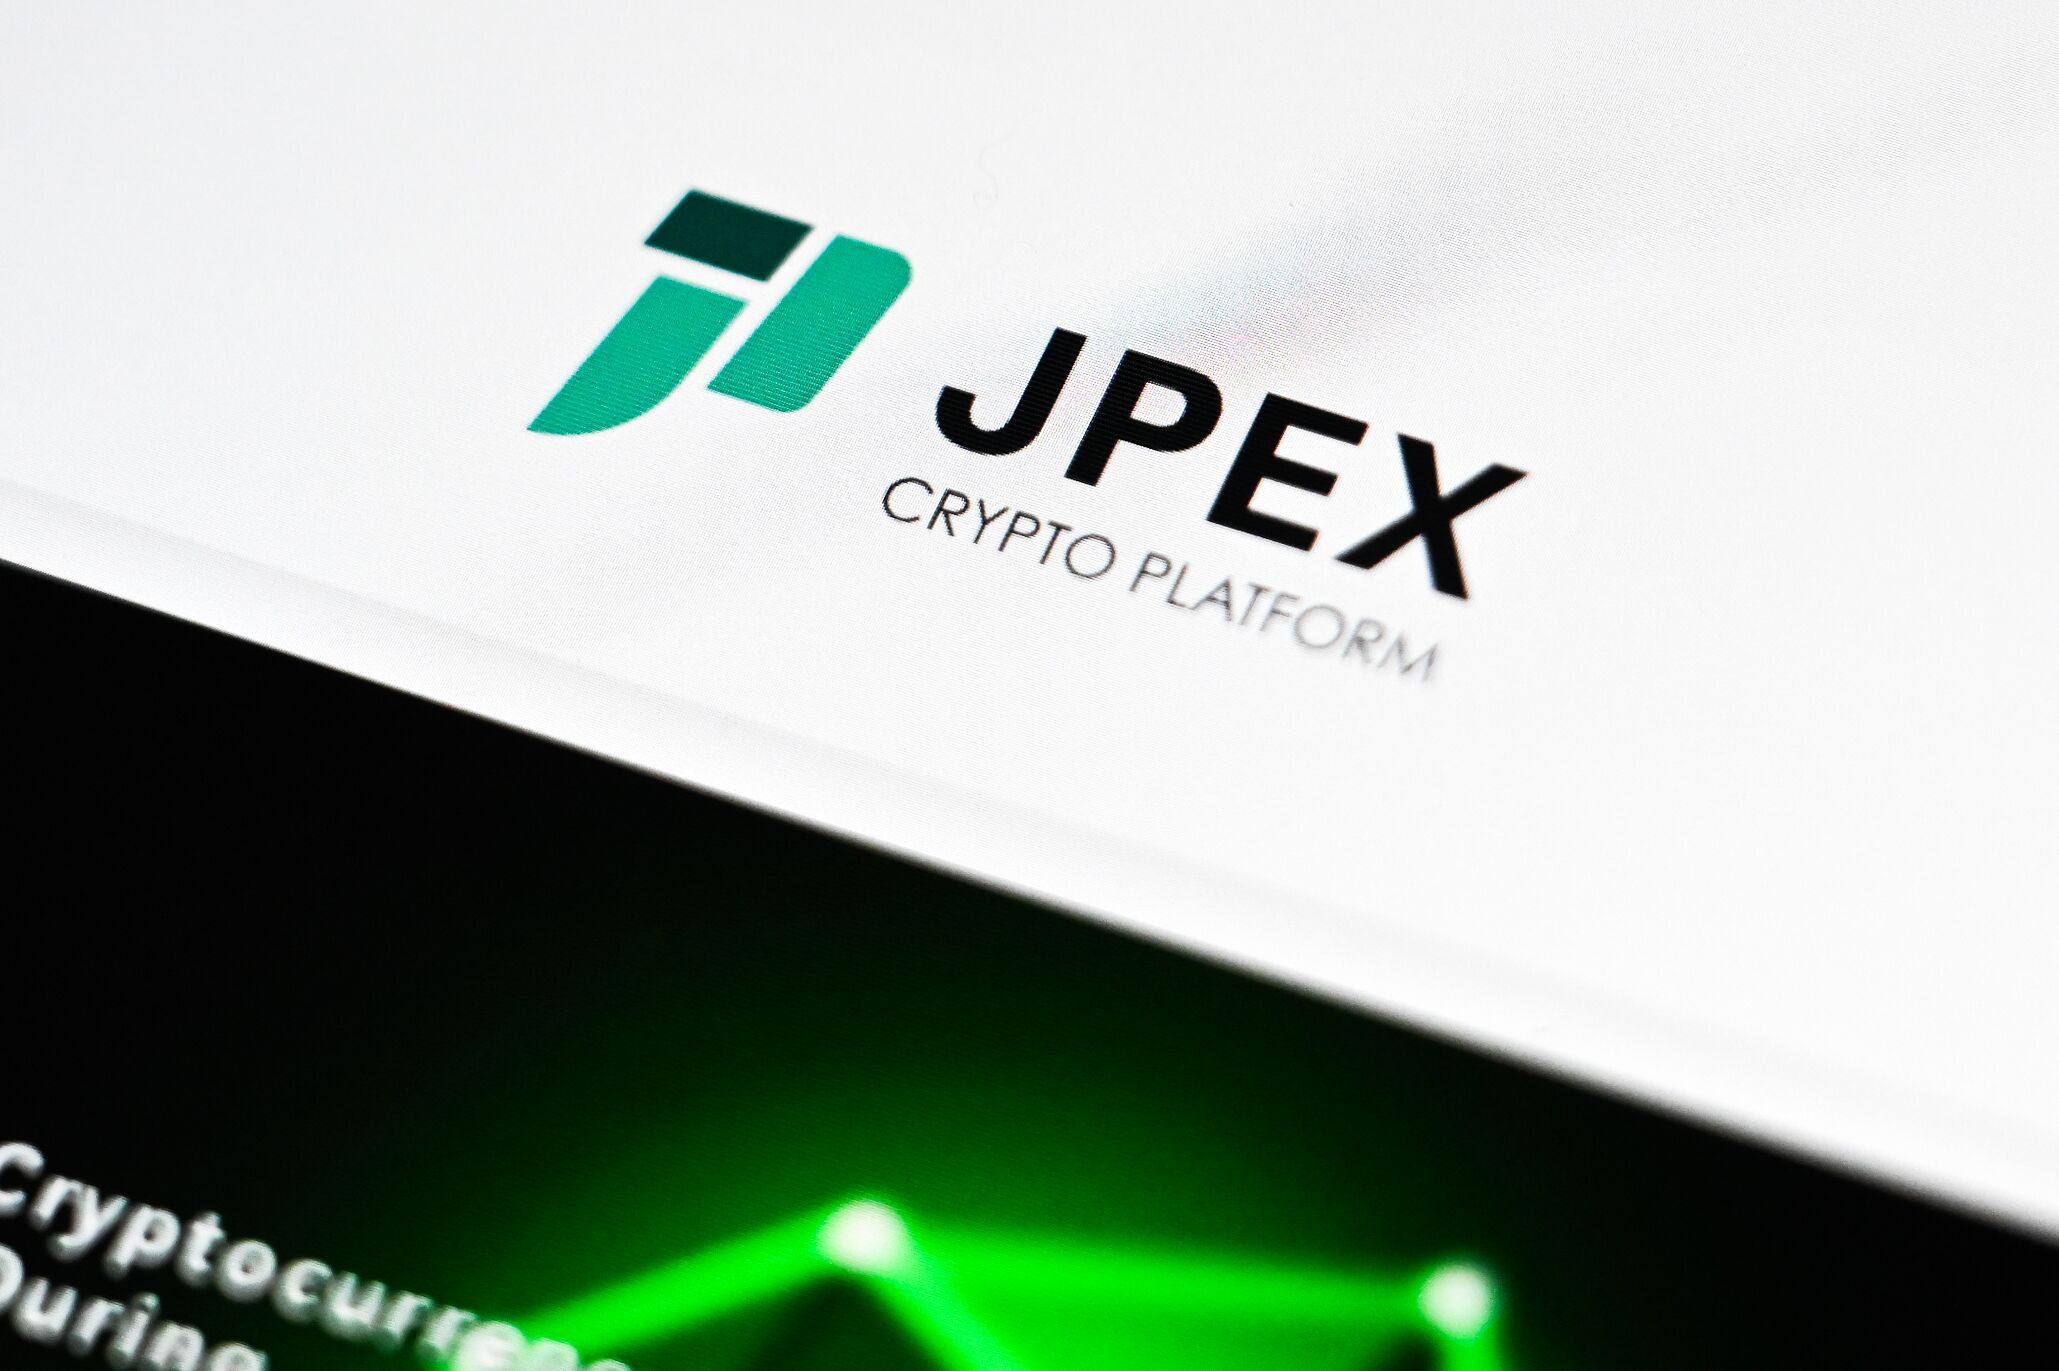 Embattled cryptocurrency platform JPEX dangled a “DAO Stakeholders Dividend Plan” in a bid to lure more users. Photo: Bloomberg